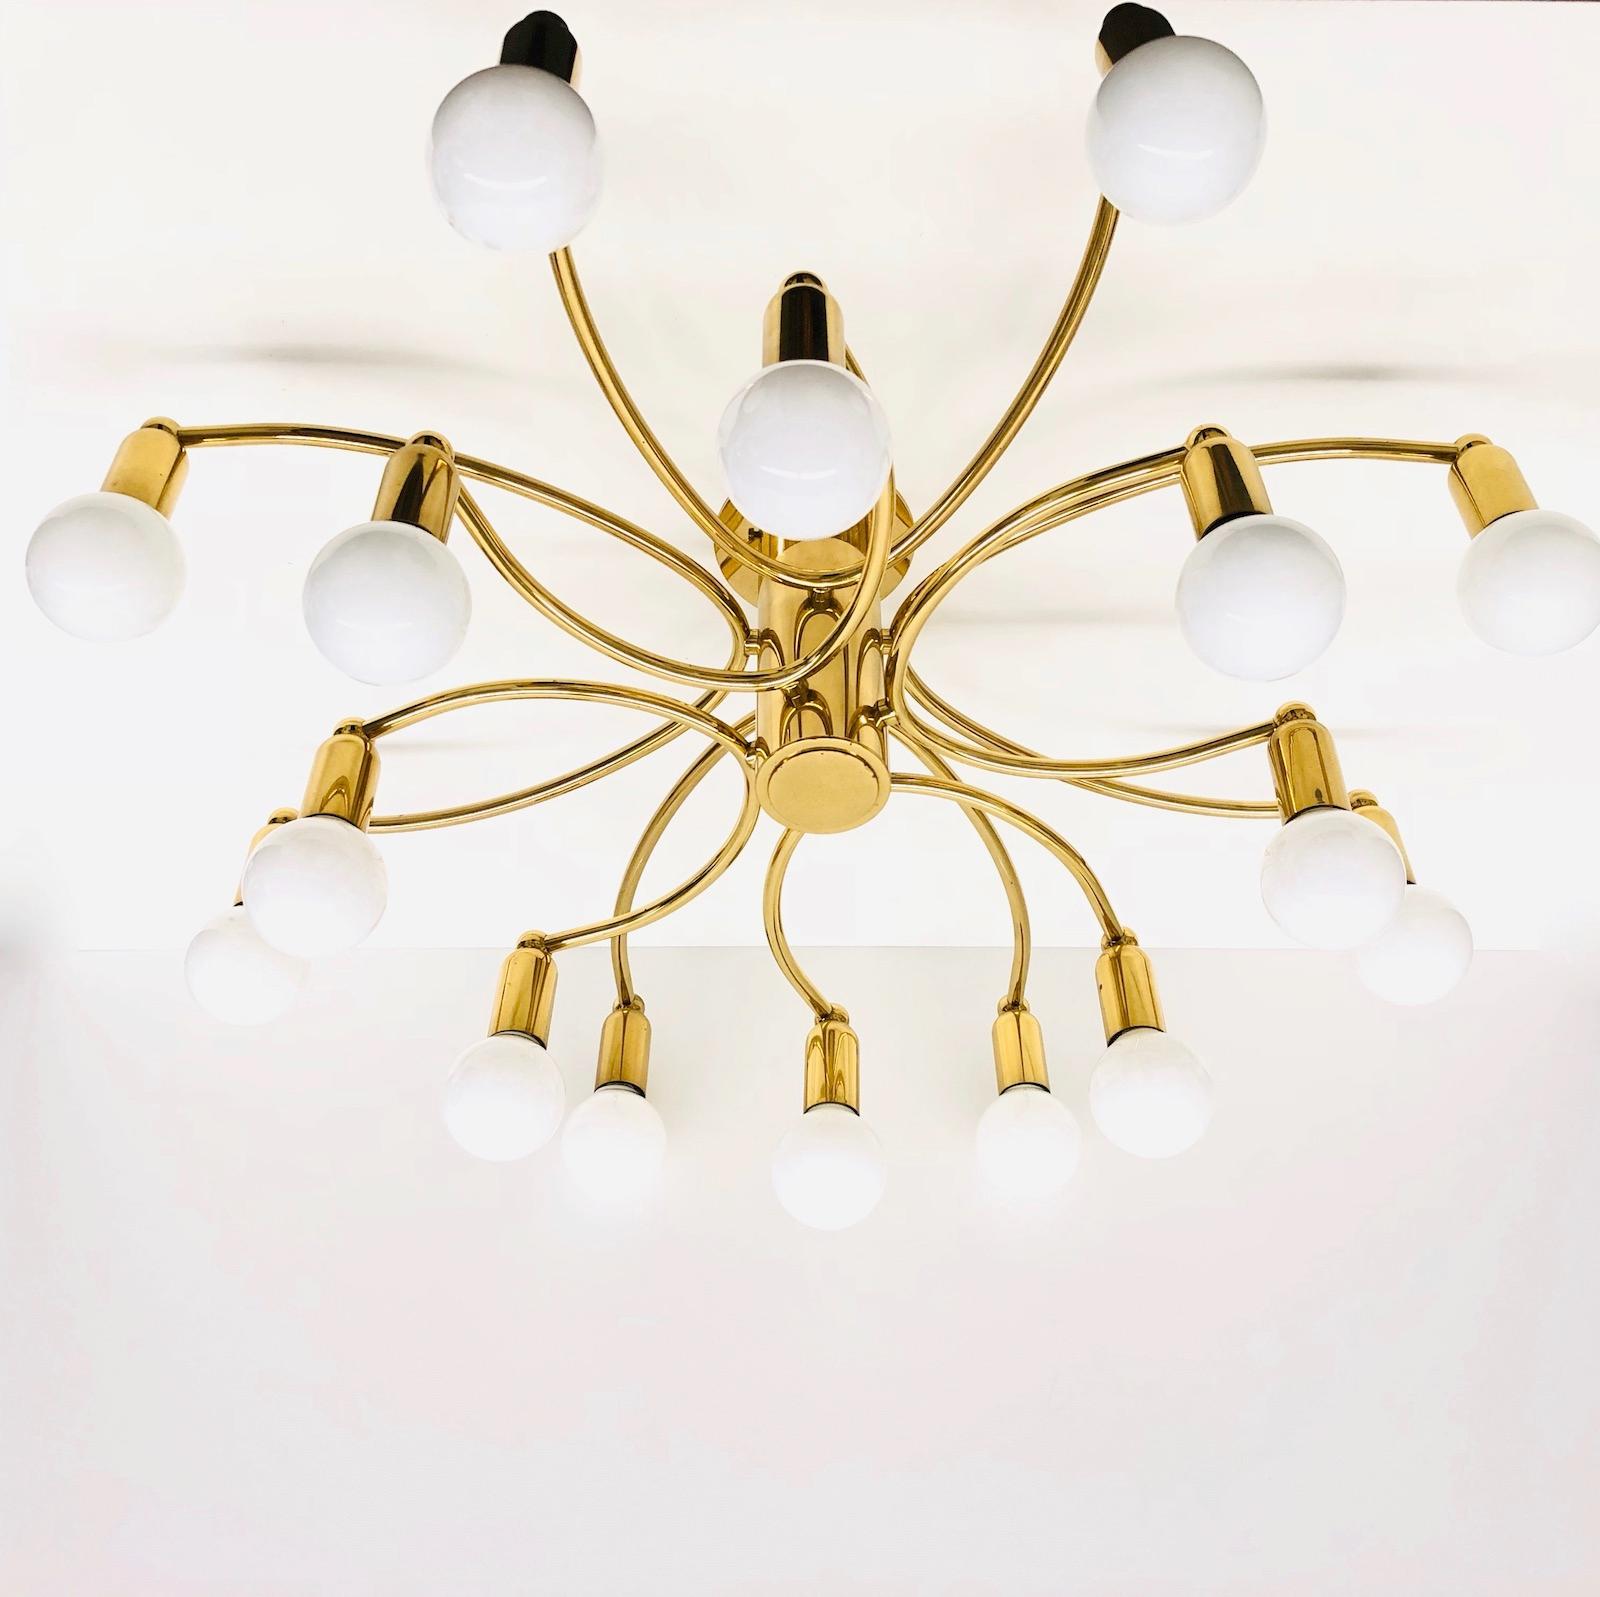 A gorgeous brass flush mount by Leola Leuchten. It can be used also as a sconce. The light fixture requires sixteen European E14 candelabra bulbs, each up to 40 watts. It measures approx. 8